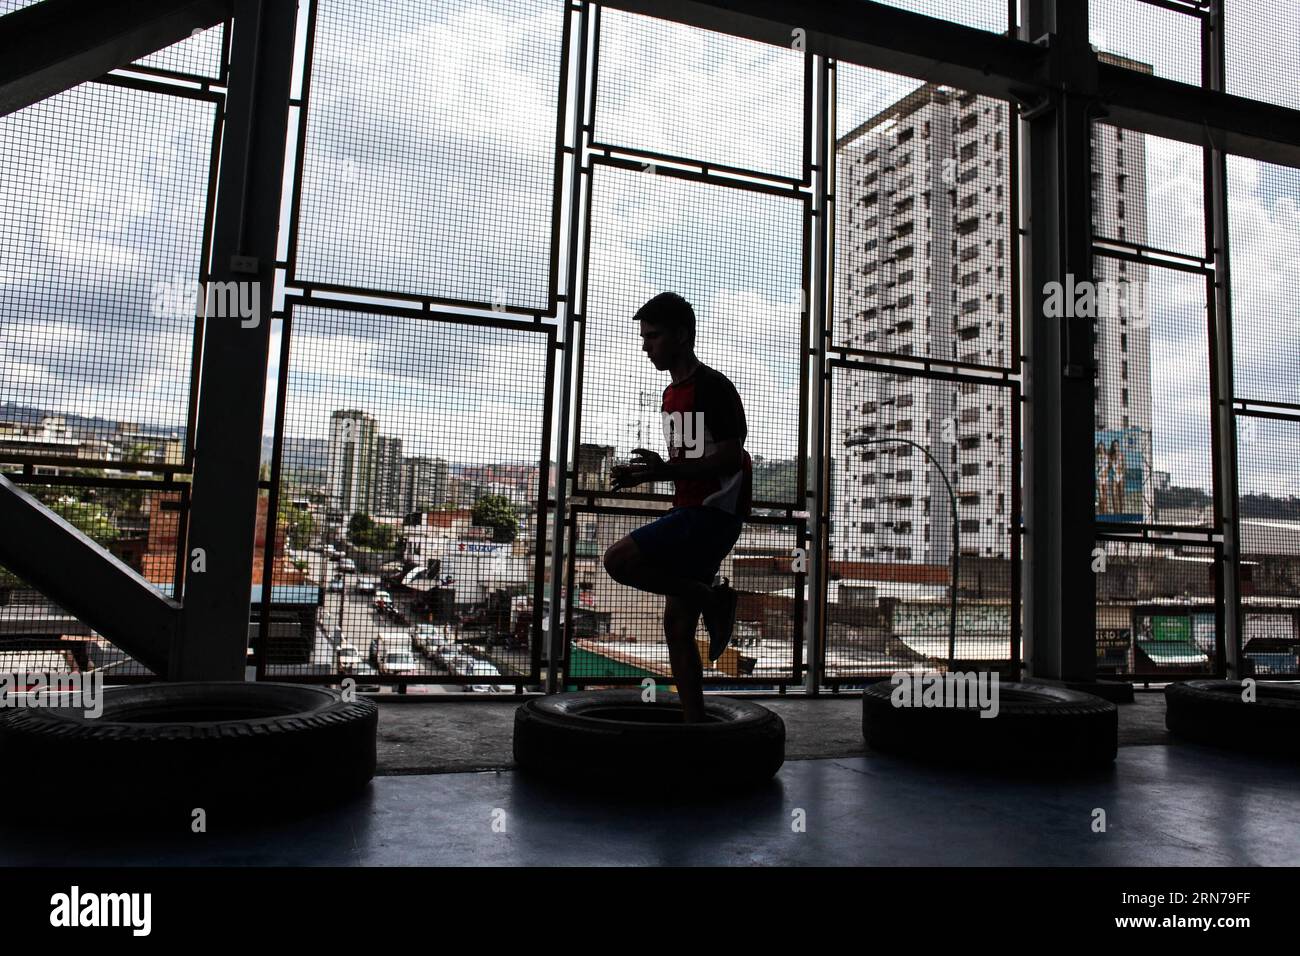 Image taken on Aug. 26, 2015 shows a young man attending a boxing training at El Dorado Vertical Gym, located in Francisco de Miranda avenue, in Buena Vista sector of Petare, Sucre municipality, Caracas Metropolitan Area, Venezuela. The Juan Montoya boxing academy, currently located at El Dorado Vertical Gym, is one of the schools serving the zones of Petare for 16 years, training the future boxers. One of the initiatives of the academy is to bring the sport closer to the communities through the training of young people. It has 7 floors, 4 of them designed for sports in the municipality, offer Stock Photo